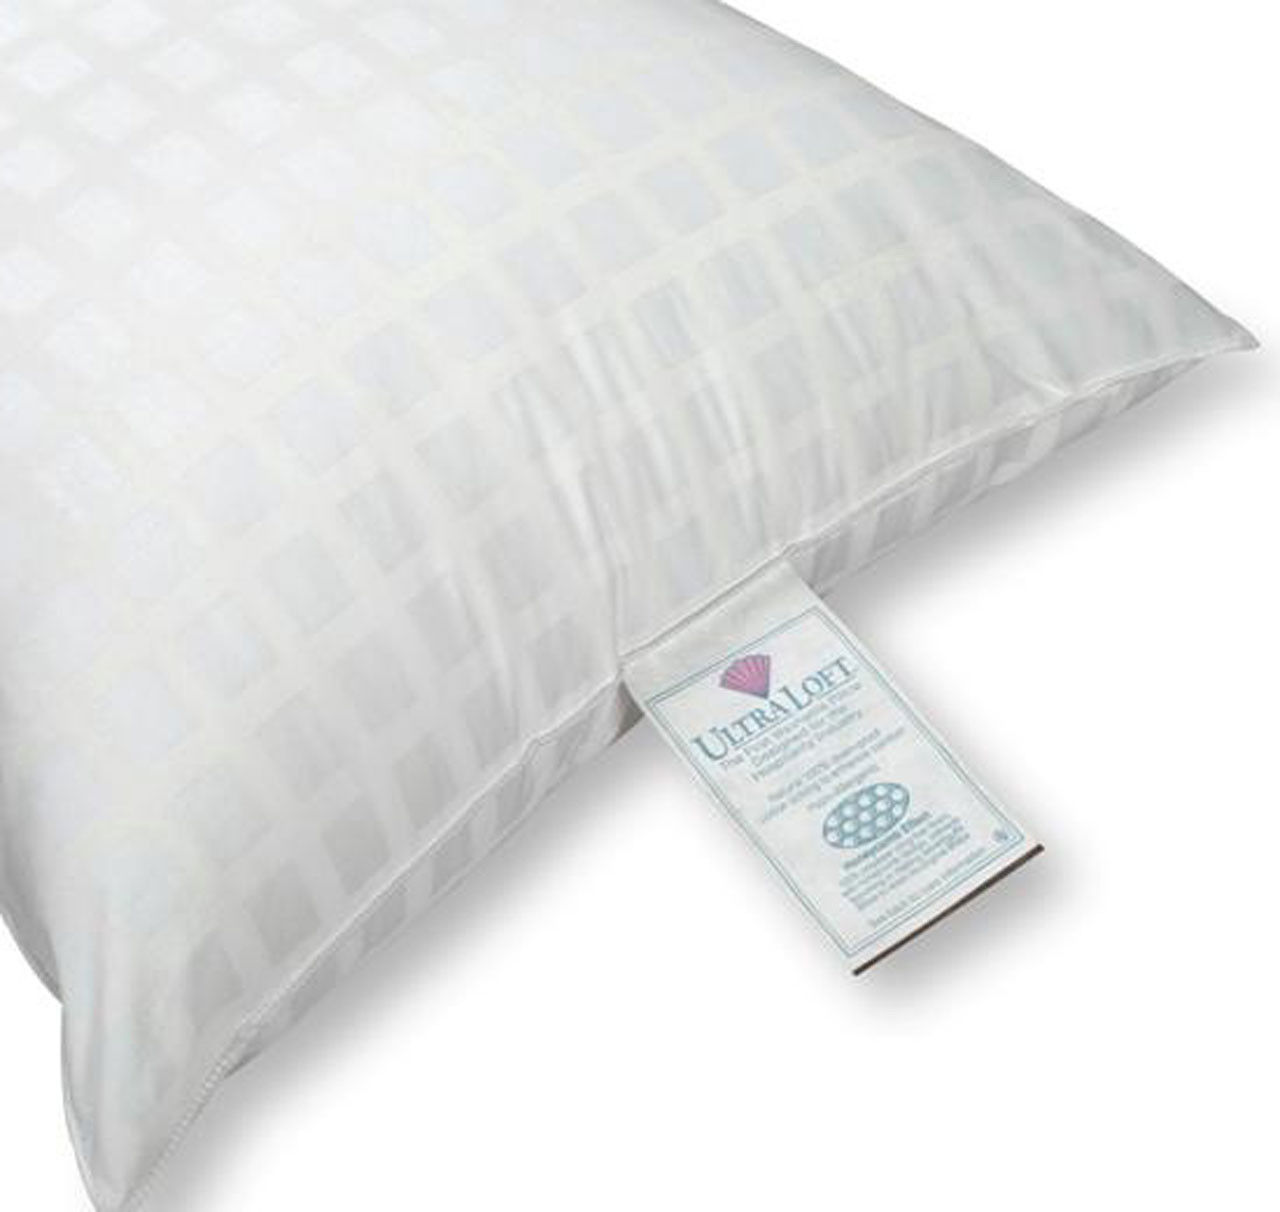 Can you tell me where the Ultraloft Pillow with the Honeycomb Fiber Effect is manufactured?